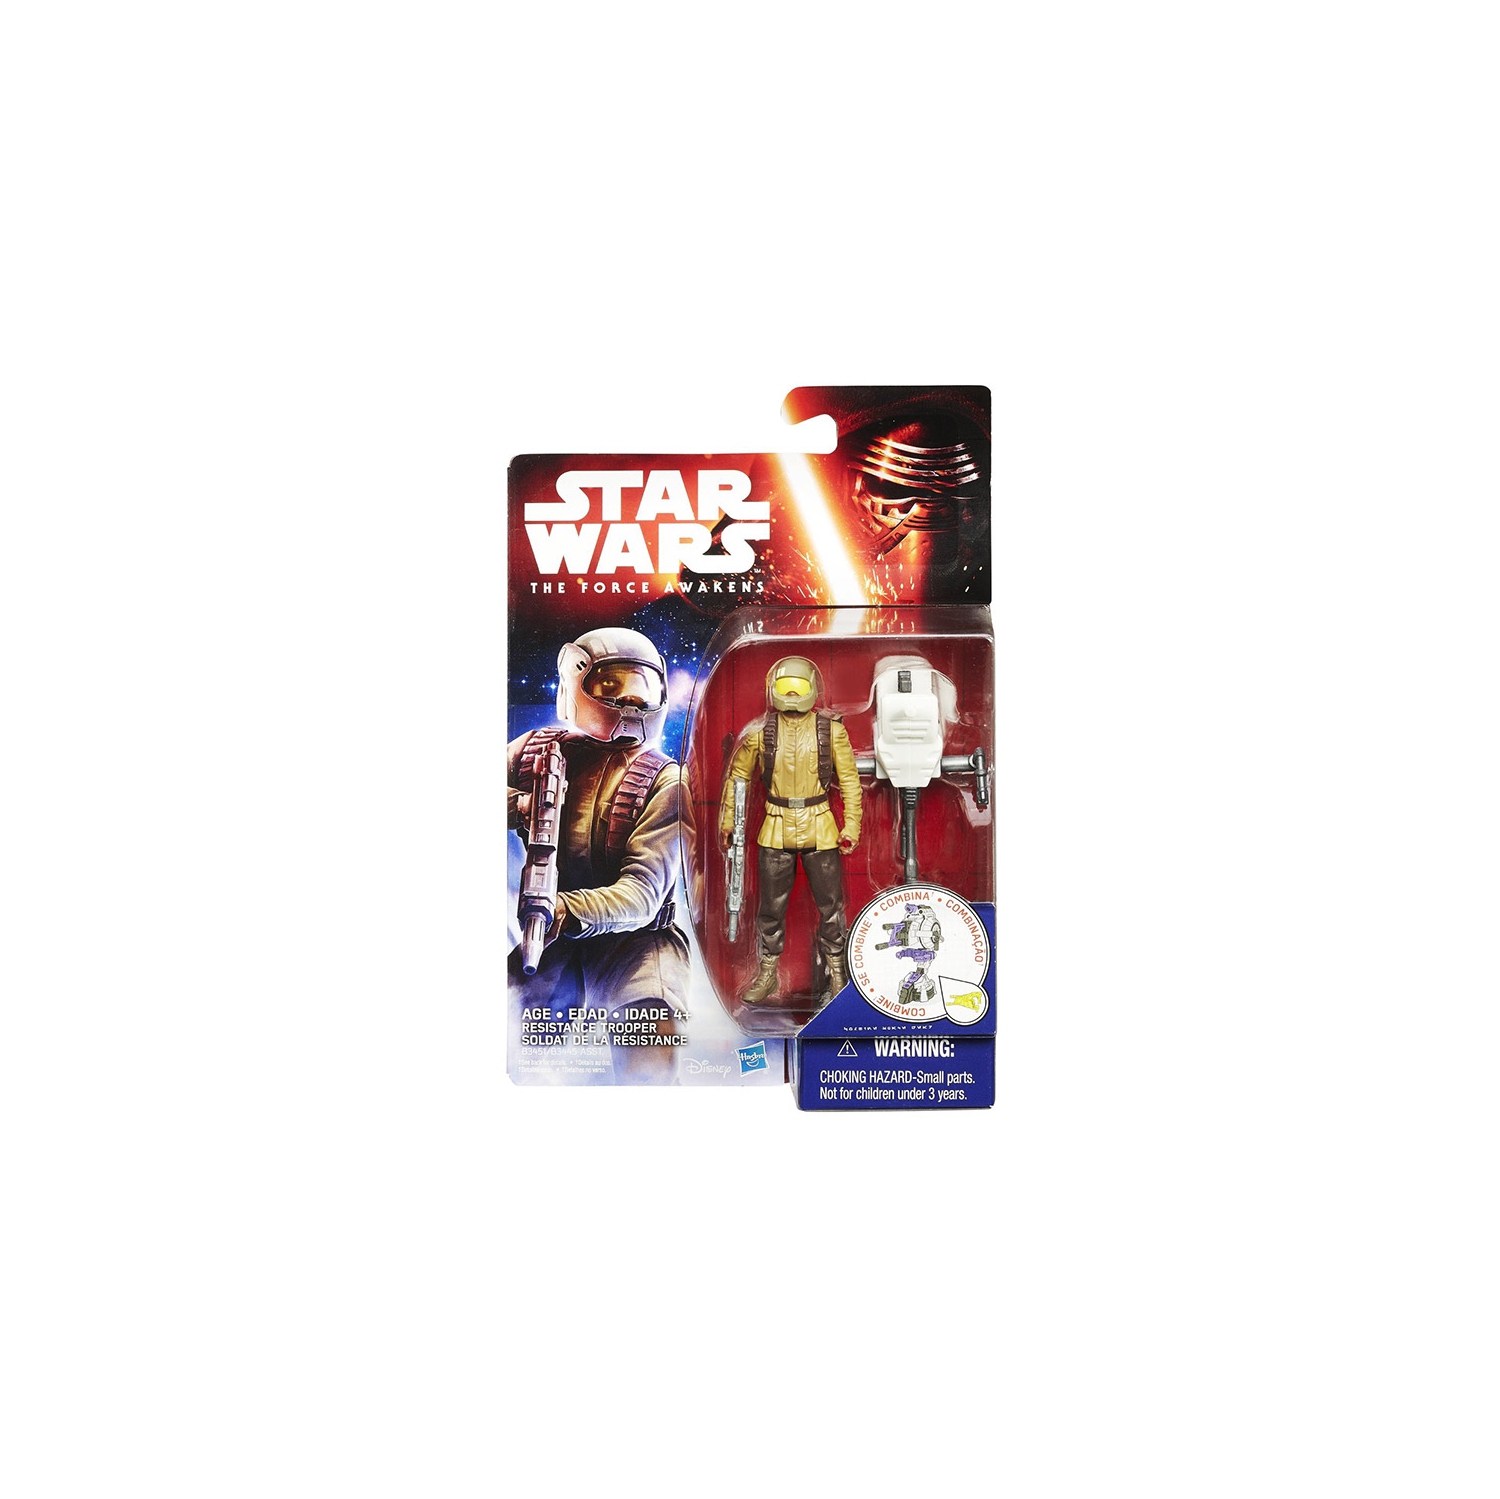 Star Wars The Force Awakens 3.75 Inch Action Figure Jungle And Space Wave 1 - Resistance Trooper